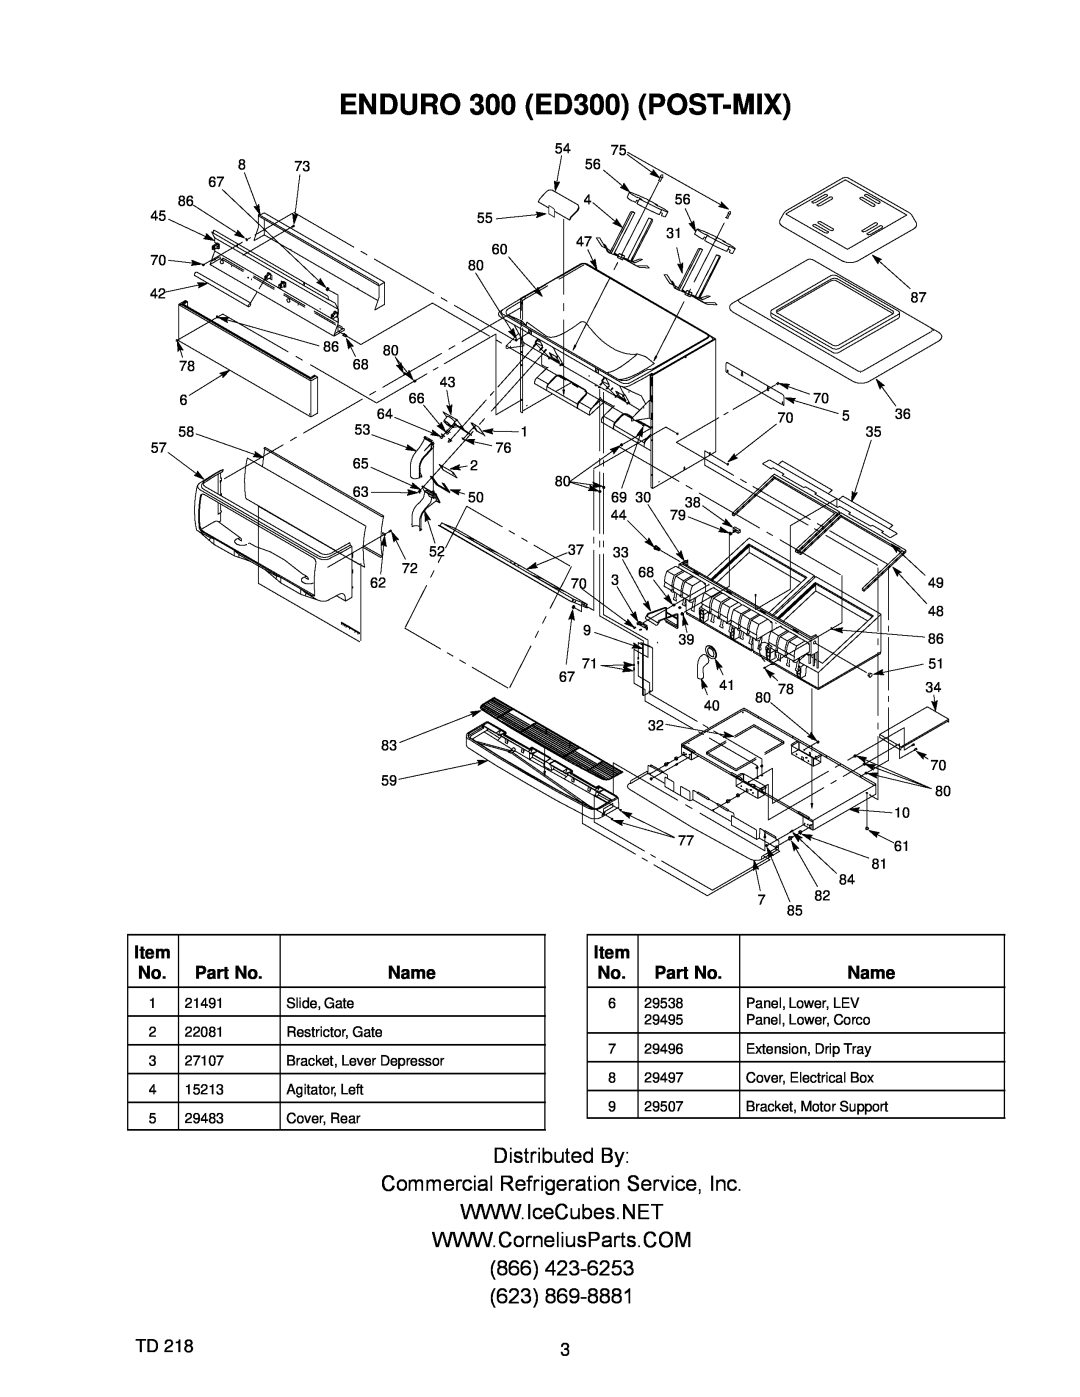 Cornelius ED Series manual ENDURO 300 ED300 POST-MIX, Distributed By, Commercial Refrigeration Service, Inc, 866423-6253 